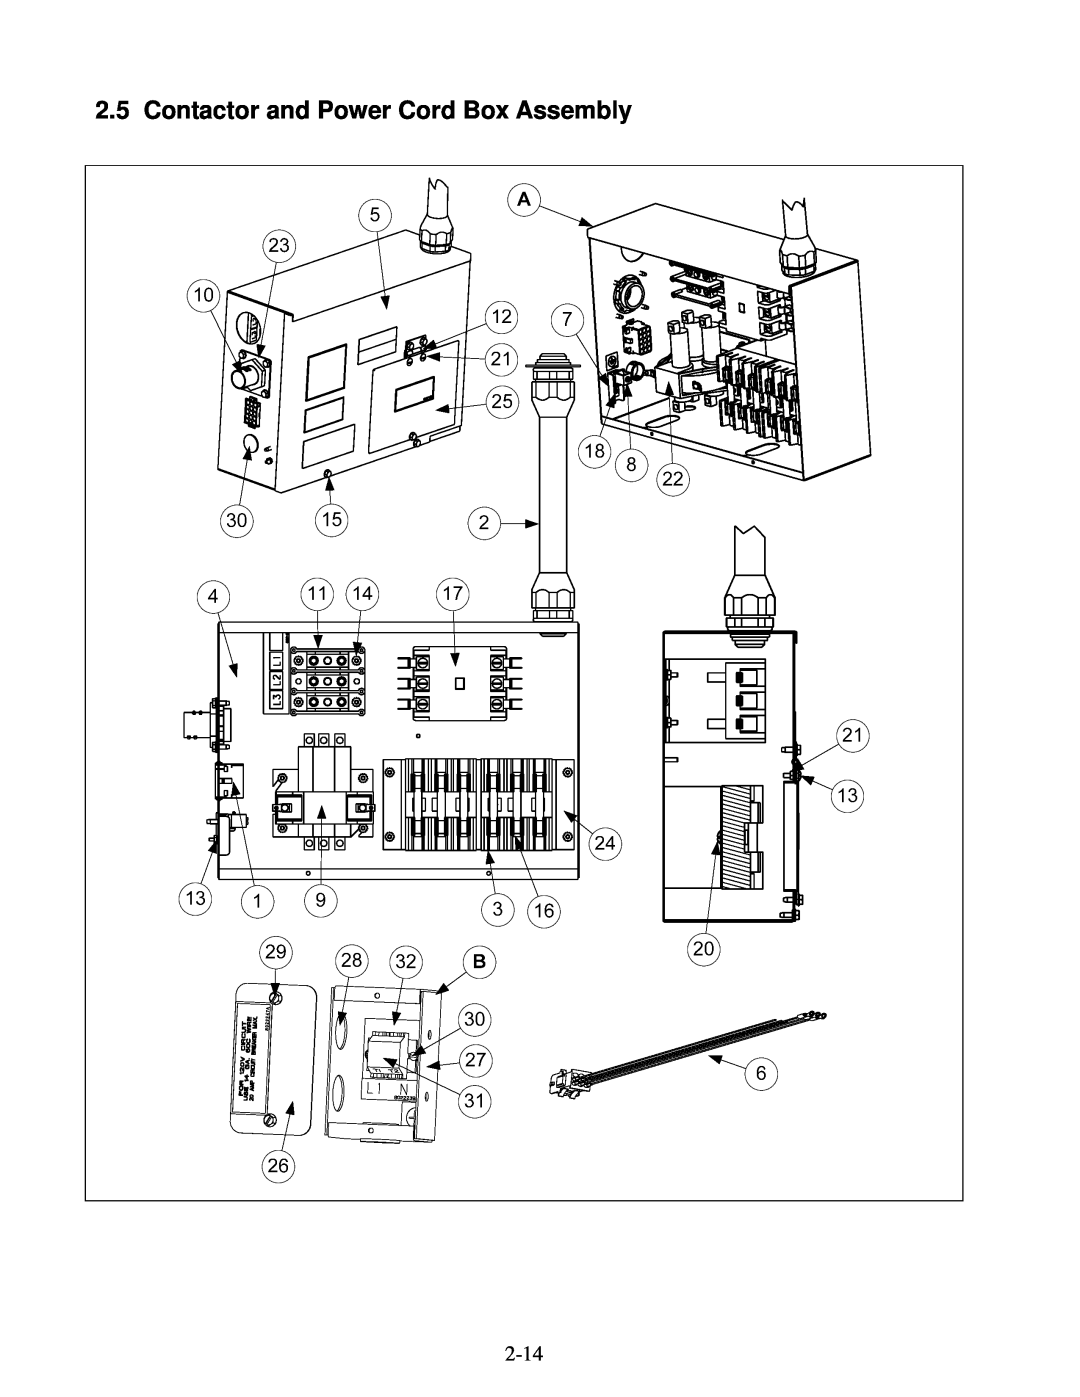 Frymaster 2836 manual Contactor and Power Cord Box Assembly 